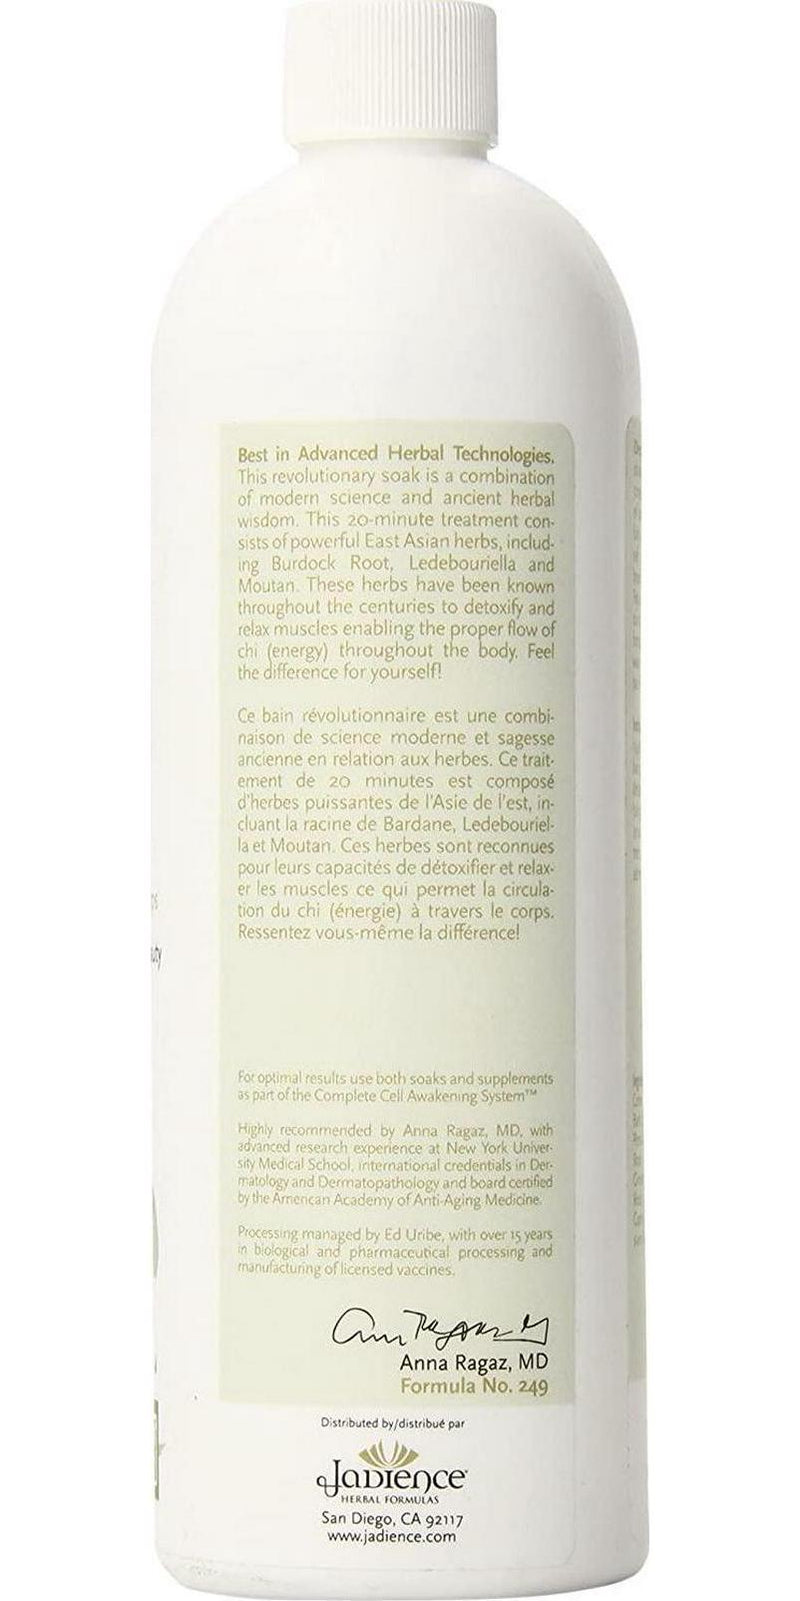 Jadience Body or Foot Detox Soak - Helps Improve Internal Organ Function to Naturally Draw Toxins from The Body, 16 Oz